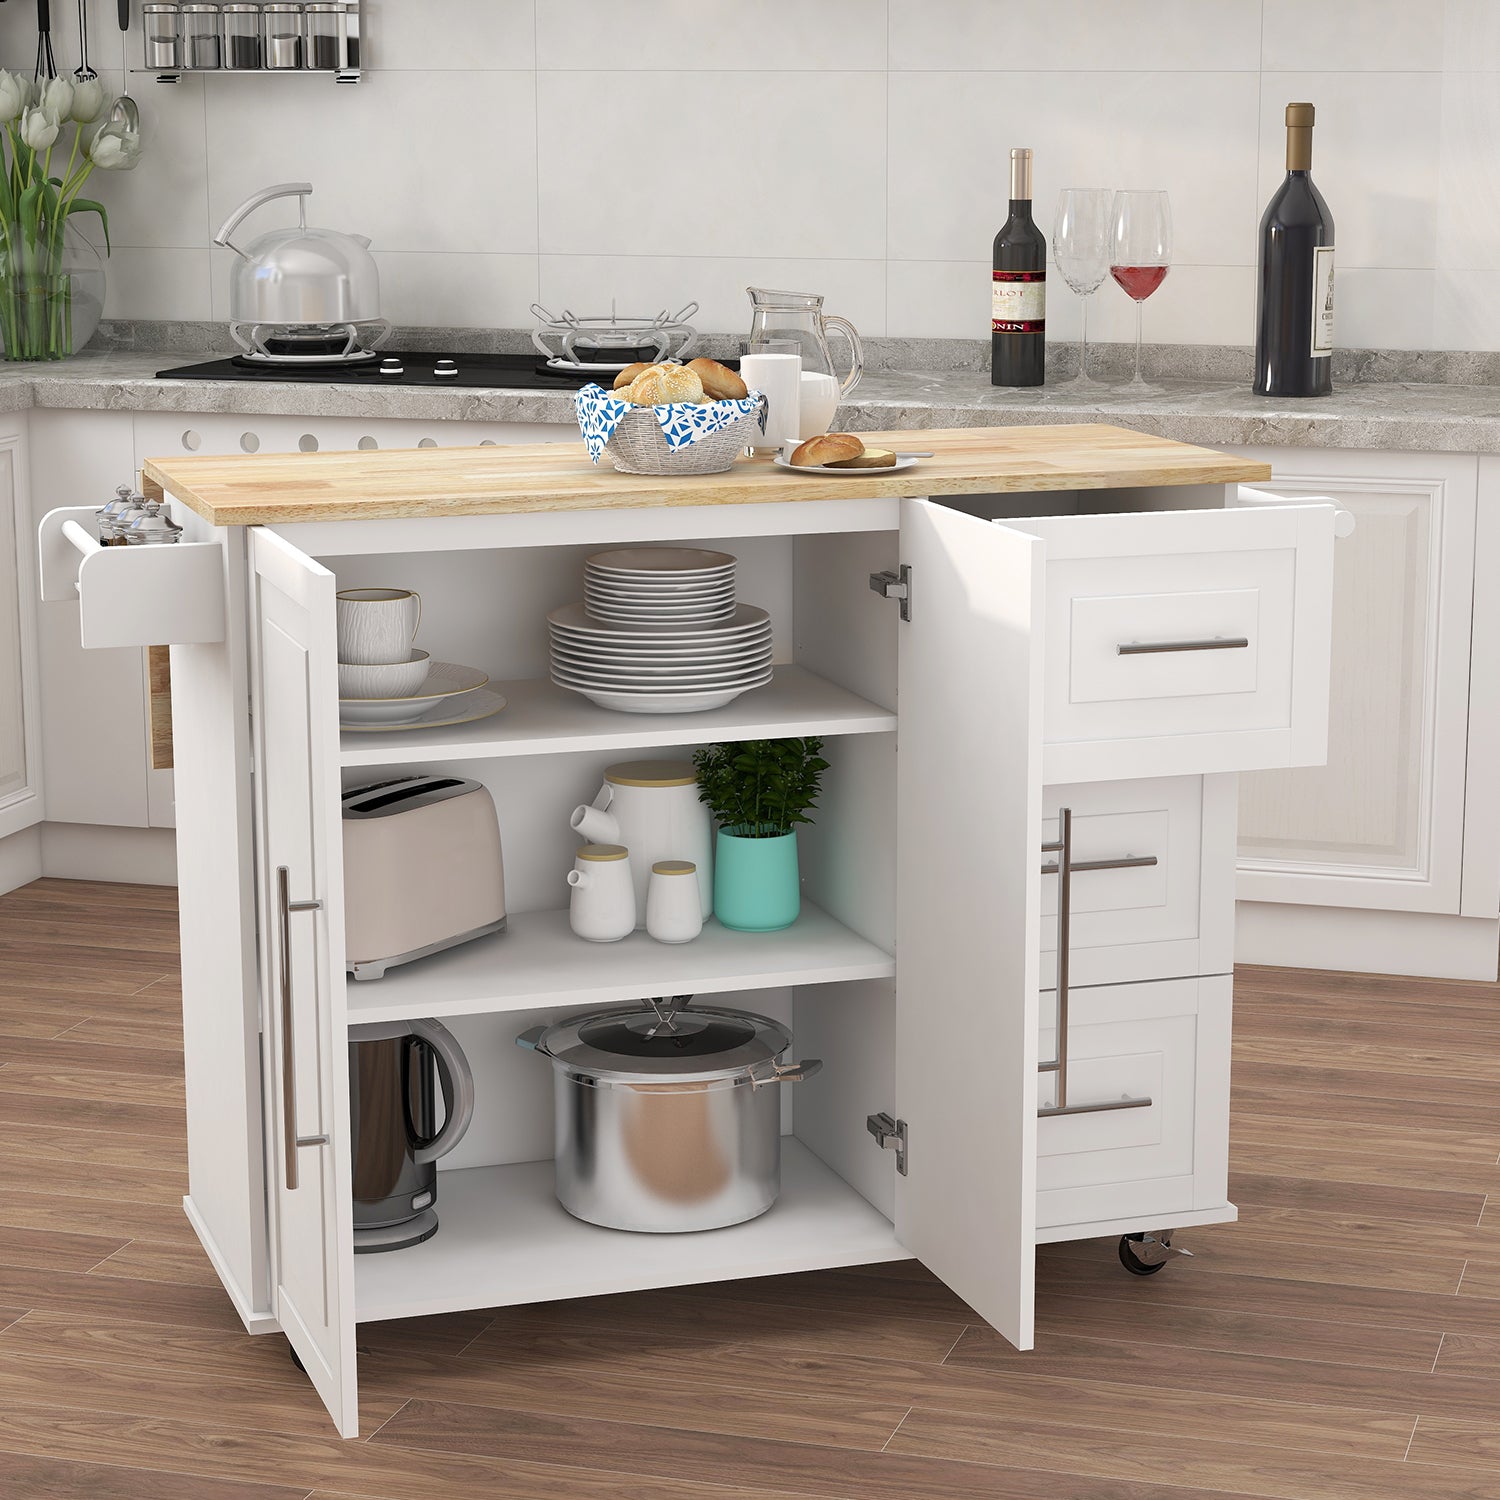 Kitchen Island with Spice Rack, Towel Rack & Extensible Solid Wood Table Top (White)